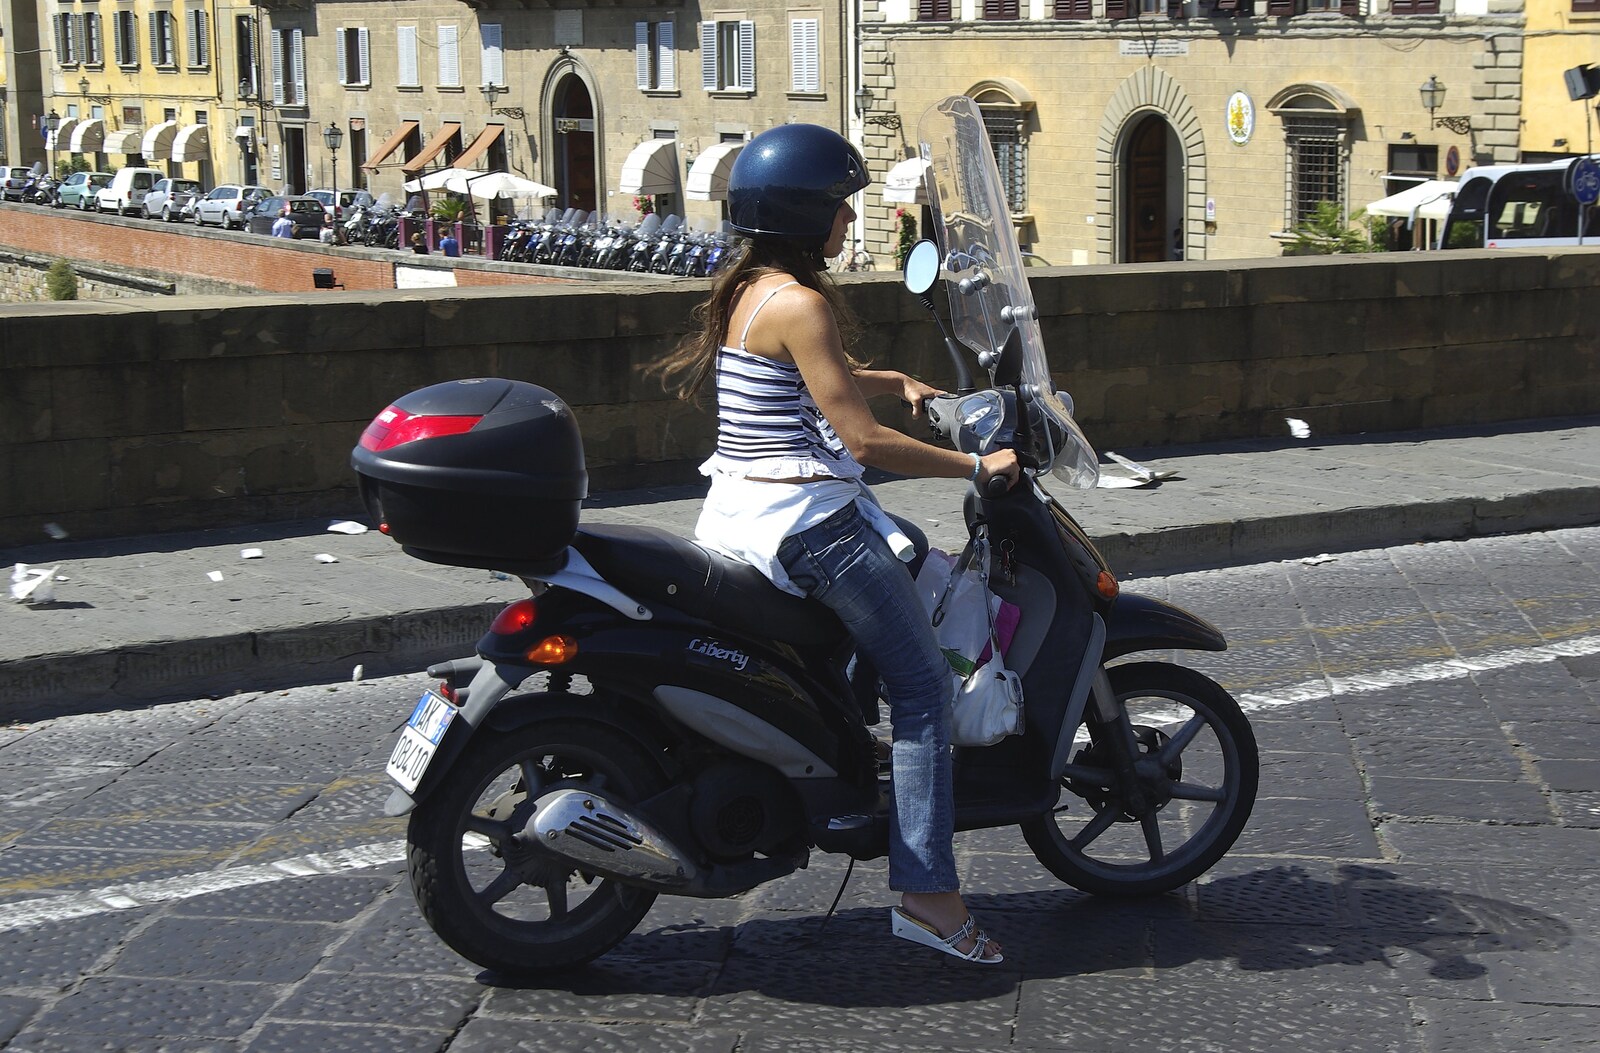 A Day Trip to Firenze, Tuscany, Italy - 24th July 2008: Another moped